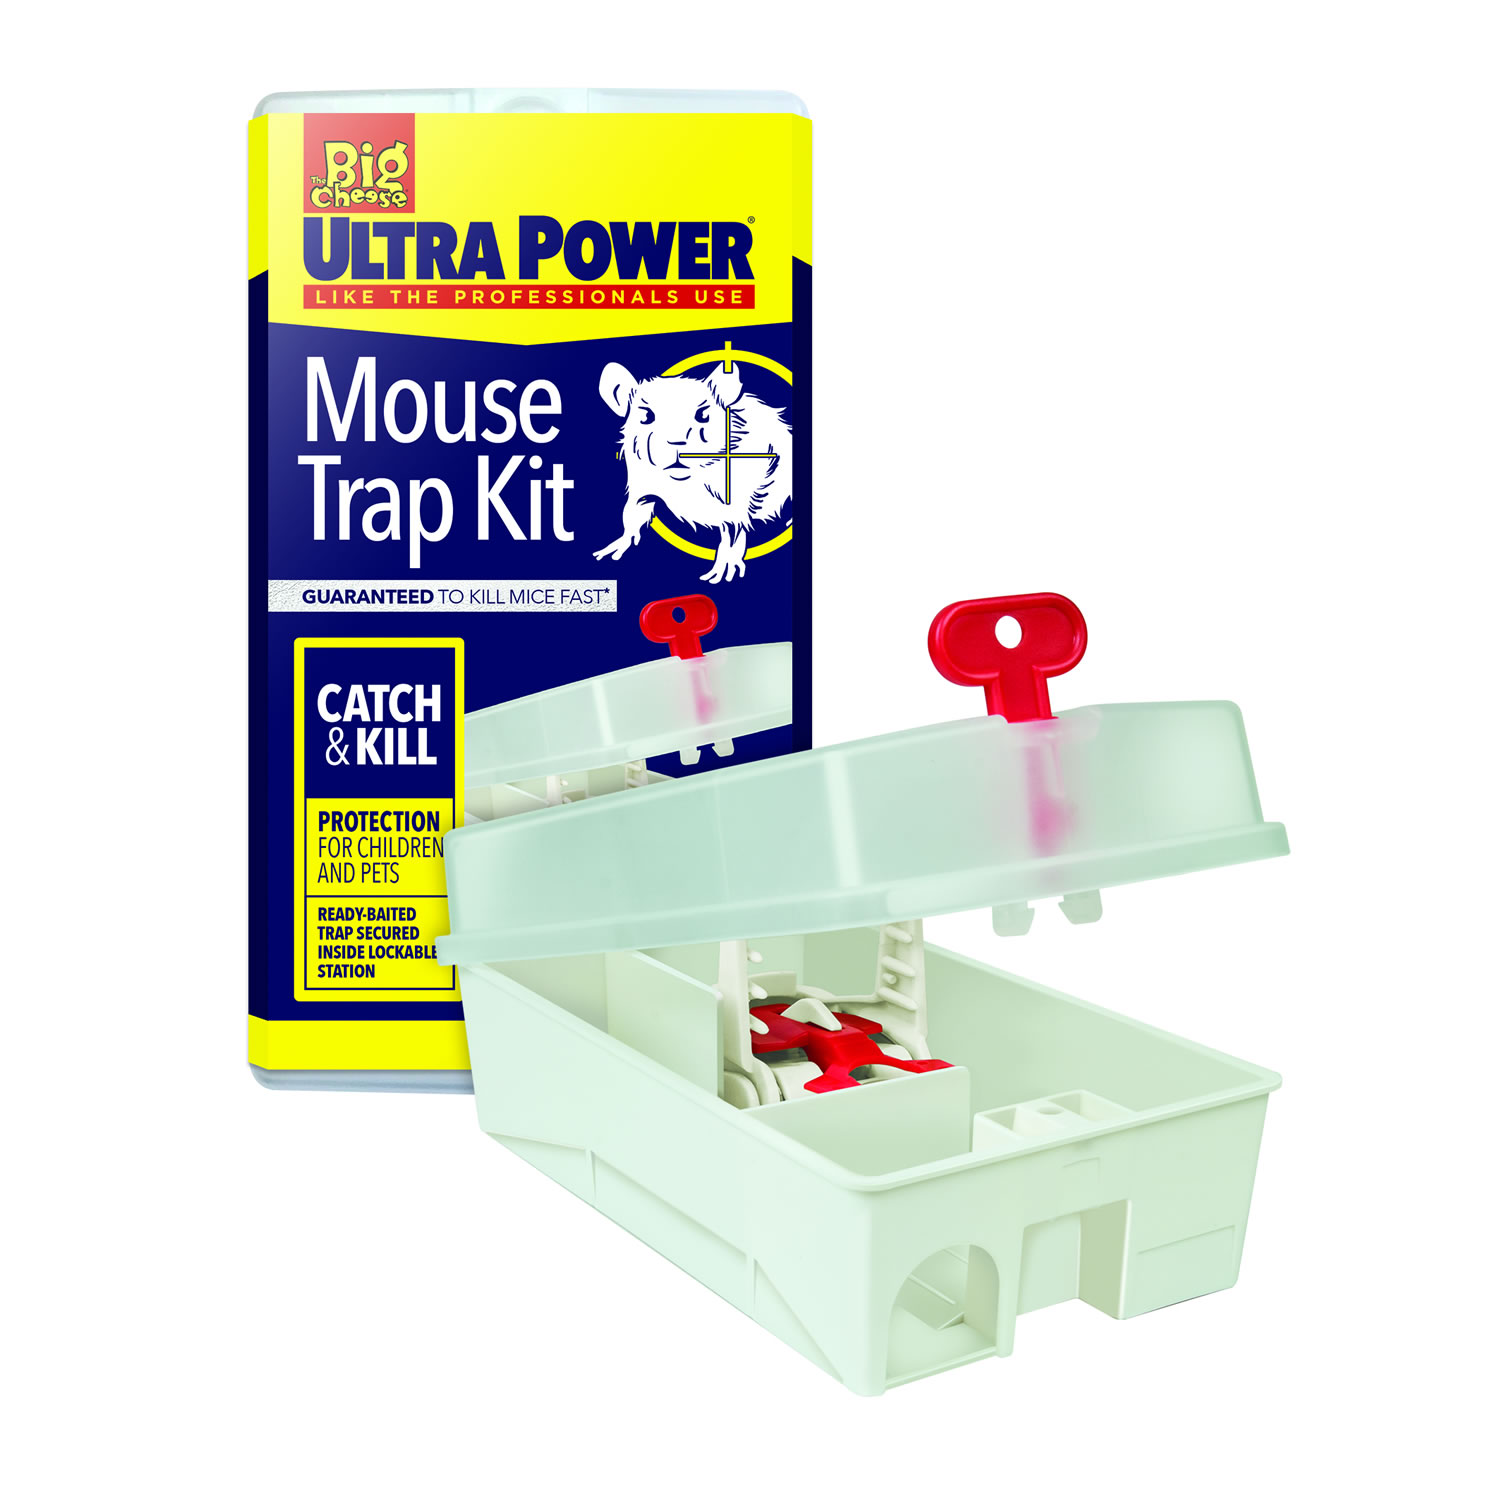 THE BIG CHEESE ULTRA POWER MOUSE TRAP KIT